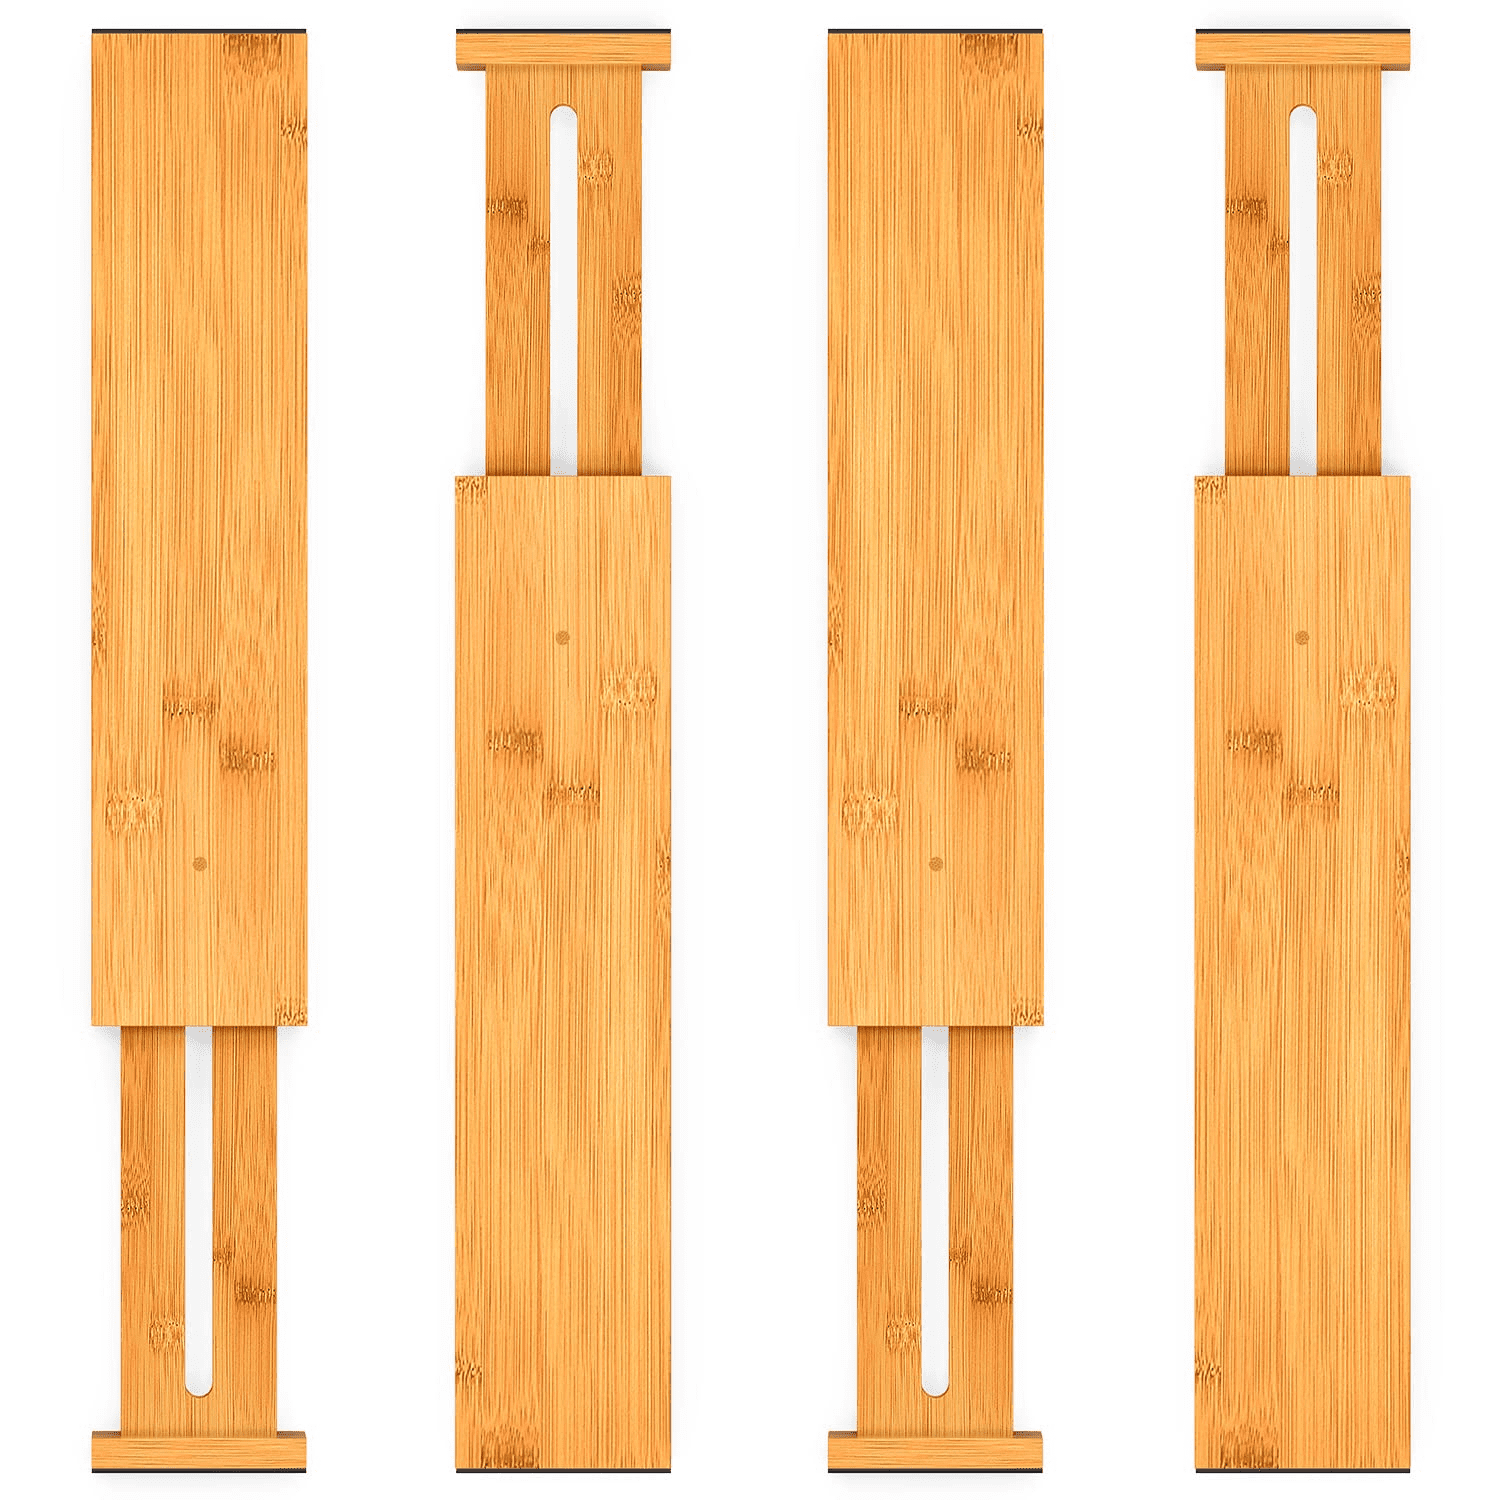 LifeReorganized 4-Pack Bamboo Drawer Dividers - Kitchen, Bedroom, Bathroom, Jewelry - Spring Loaded Tension with Eva Pads on Each End to Hold Tight